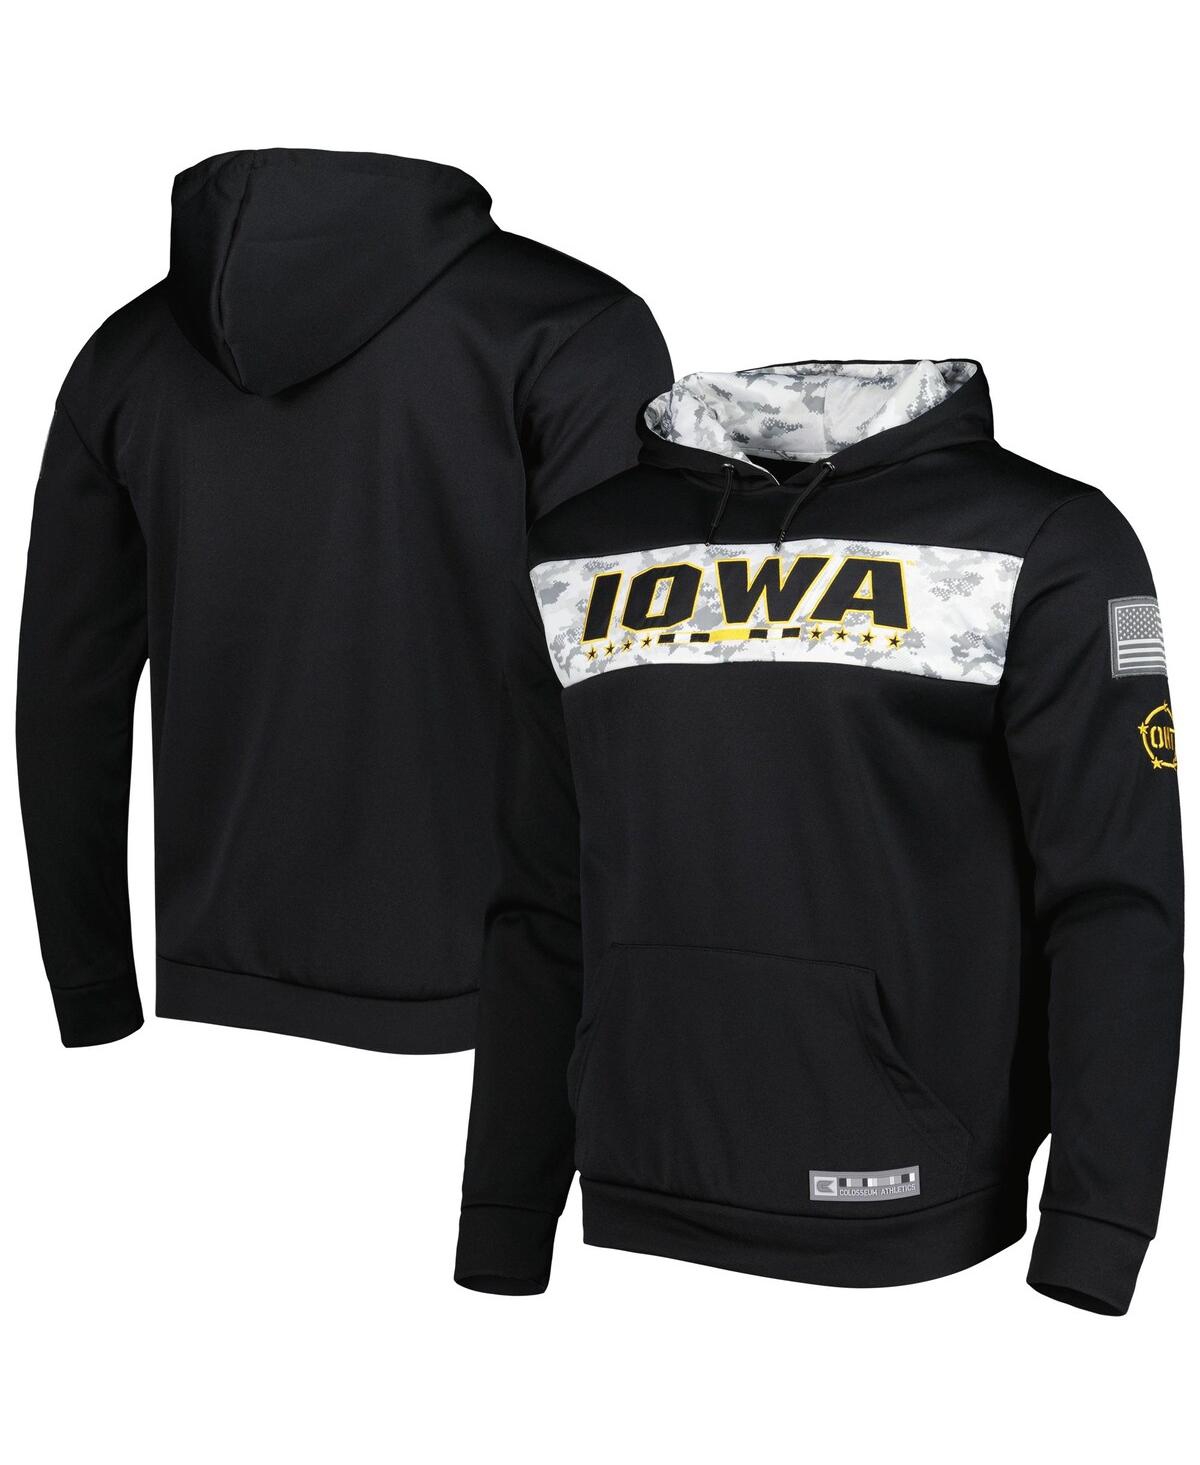 Shop Colosseum Men's  Black Iowa Hawkeyes Oht Military-inspired Appreciation Team Color Pullover Hoodie